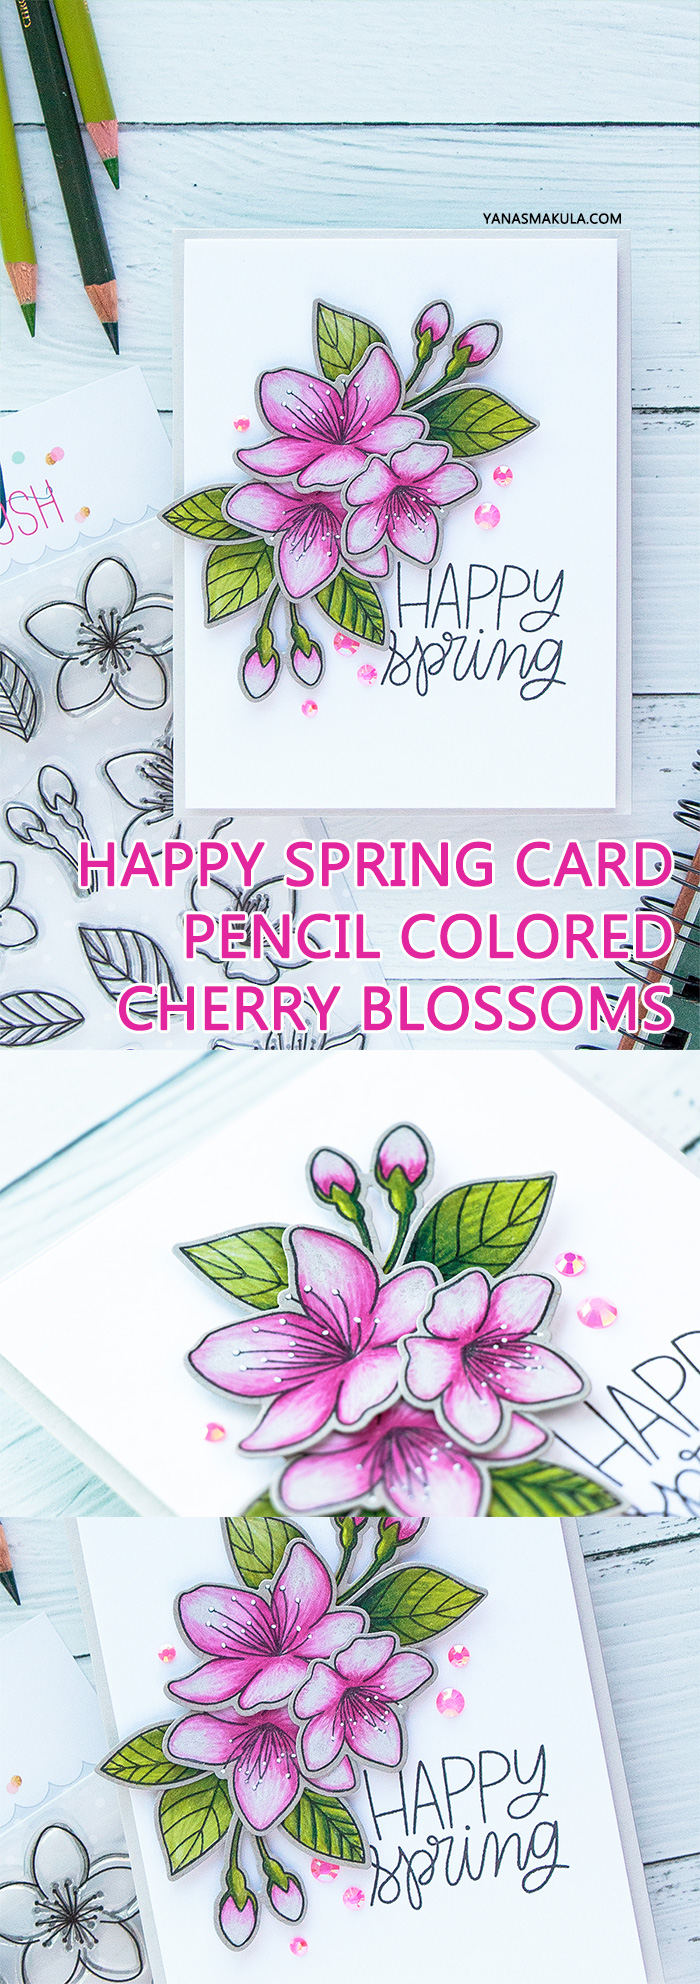 Pretty Pink Posh | Cherry Blossoms & Polychromos Pencils. Video + Blog Hop + Giveaway Handmade card by Yana Smakula #cardmaking #pencilcoloring #polychromos #adultcoloring #prettypinkposh